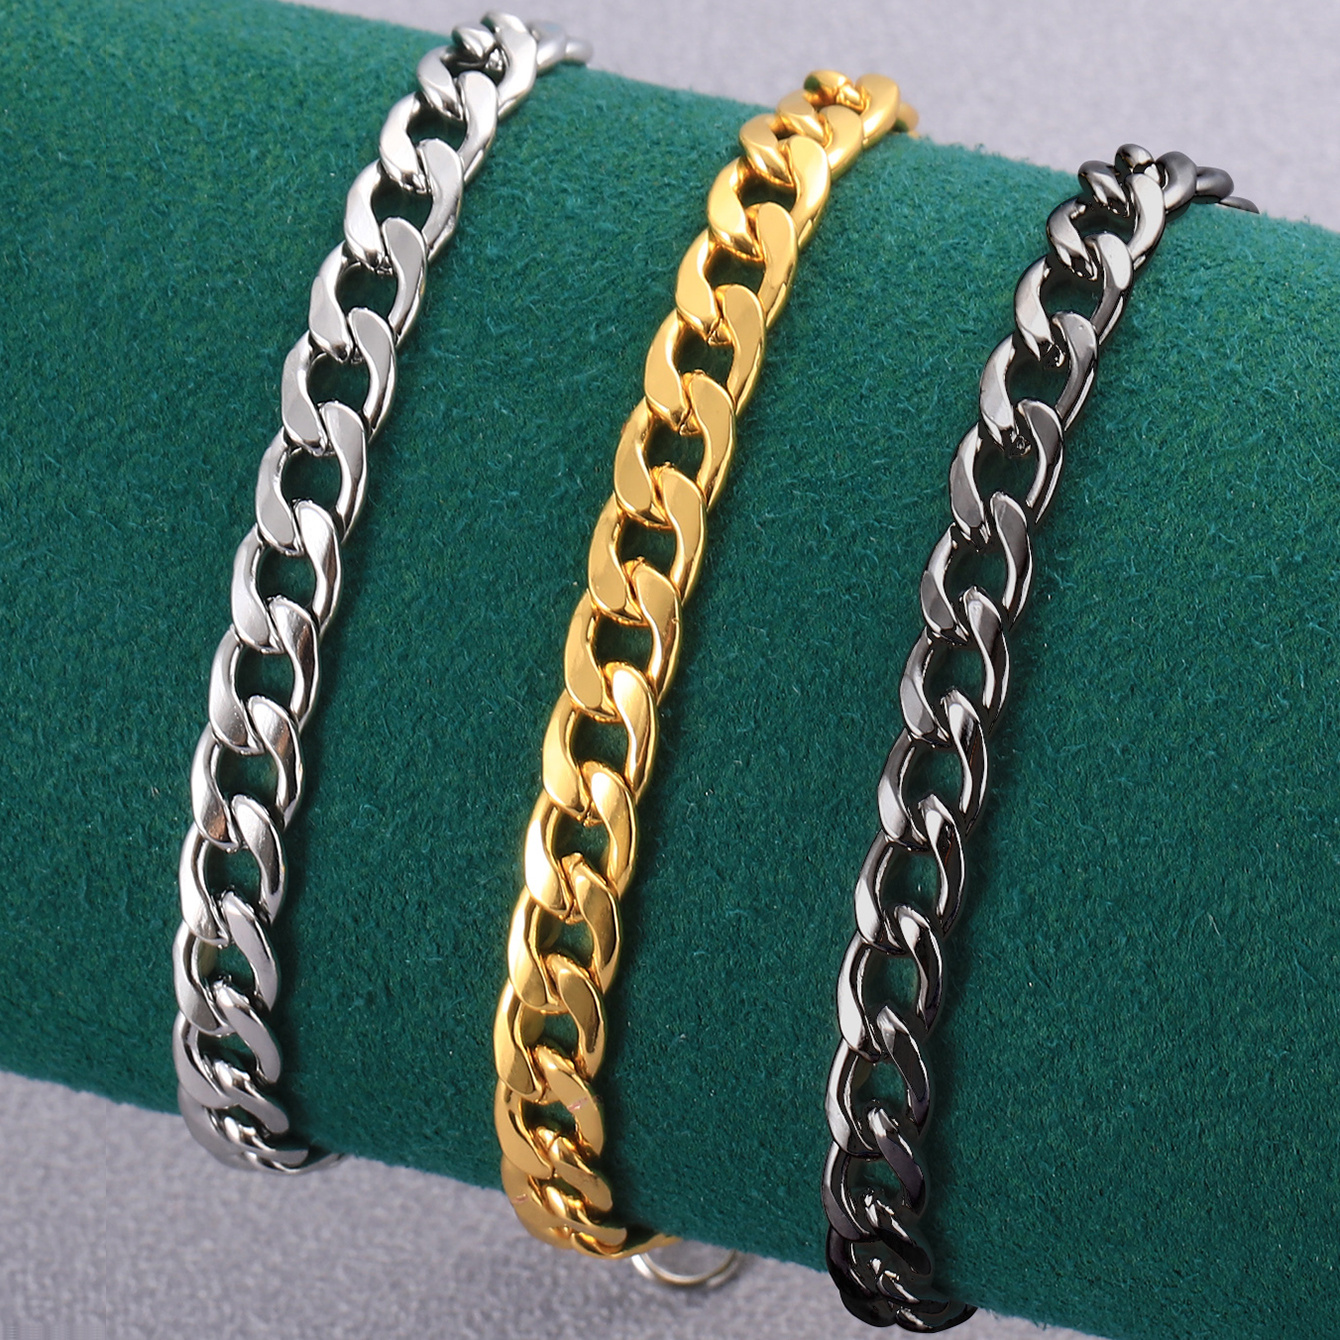 Vnox 6mm Box Chain Bracelets for Men, Basic Punk Stainless Steel Links  Wristband, Casual Male Jewelry